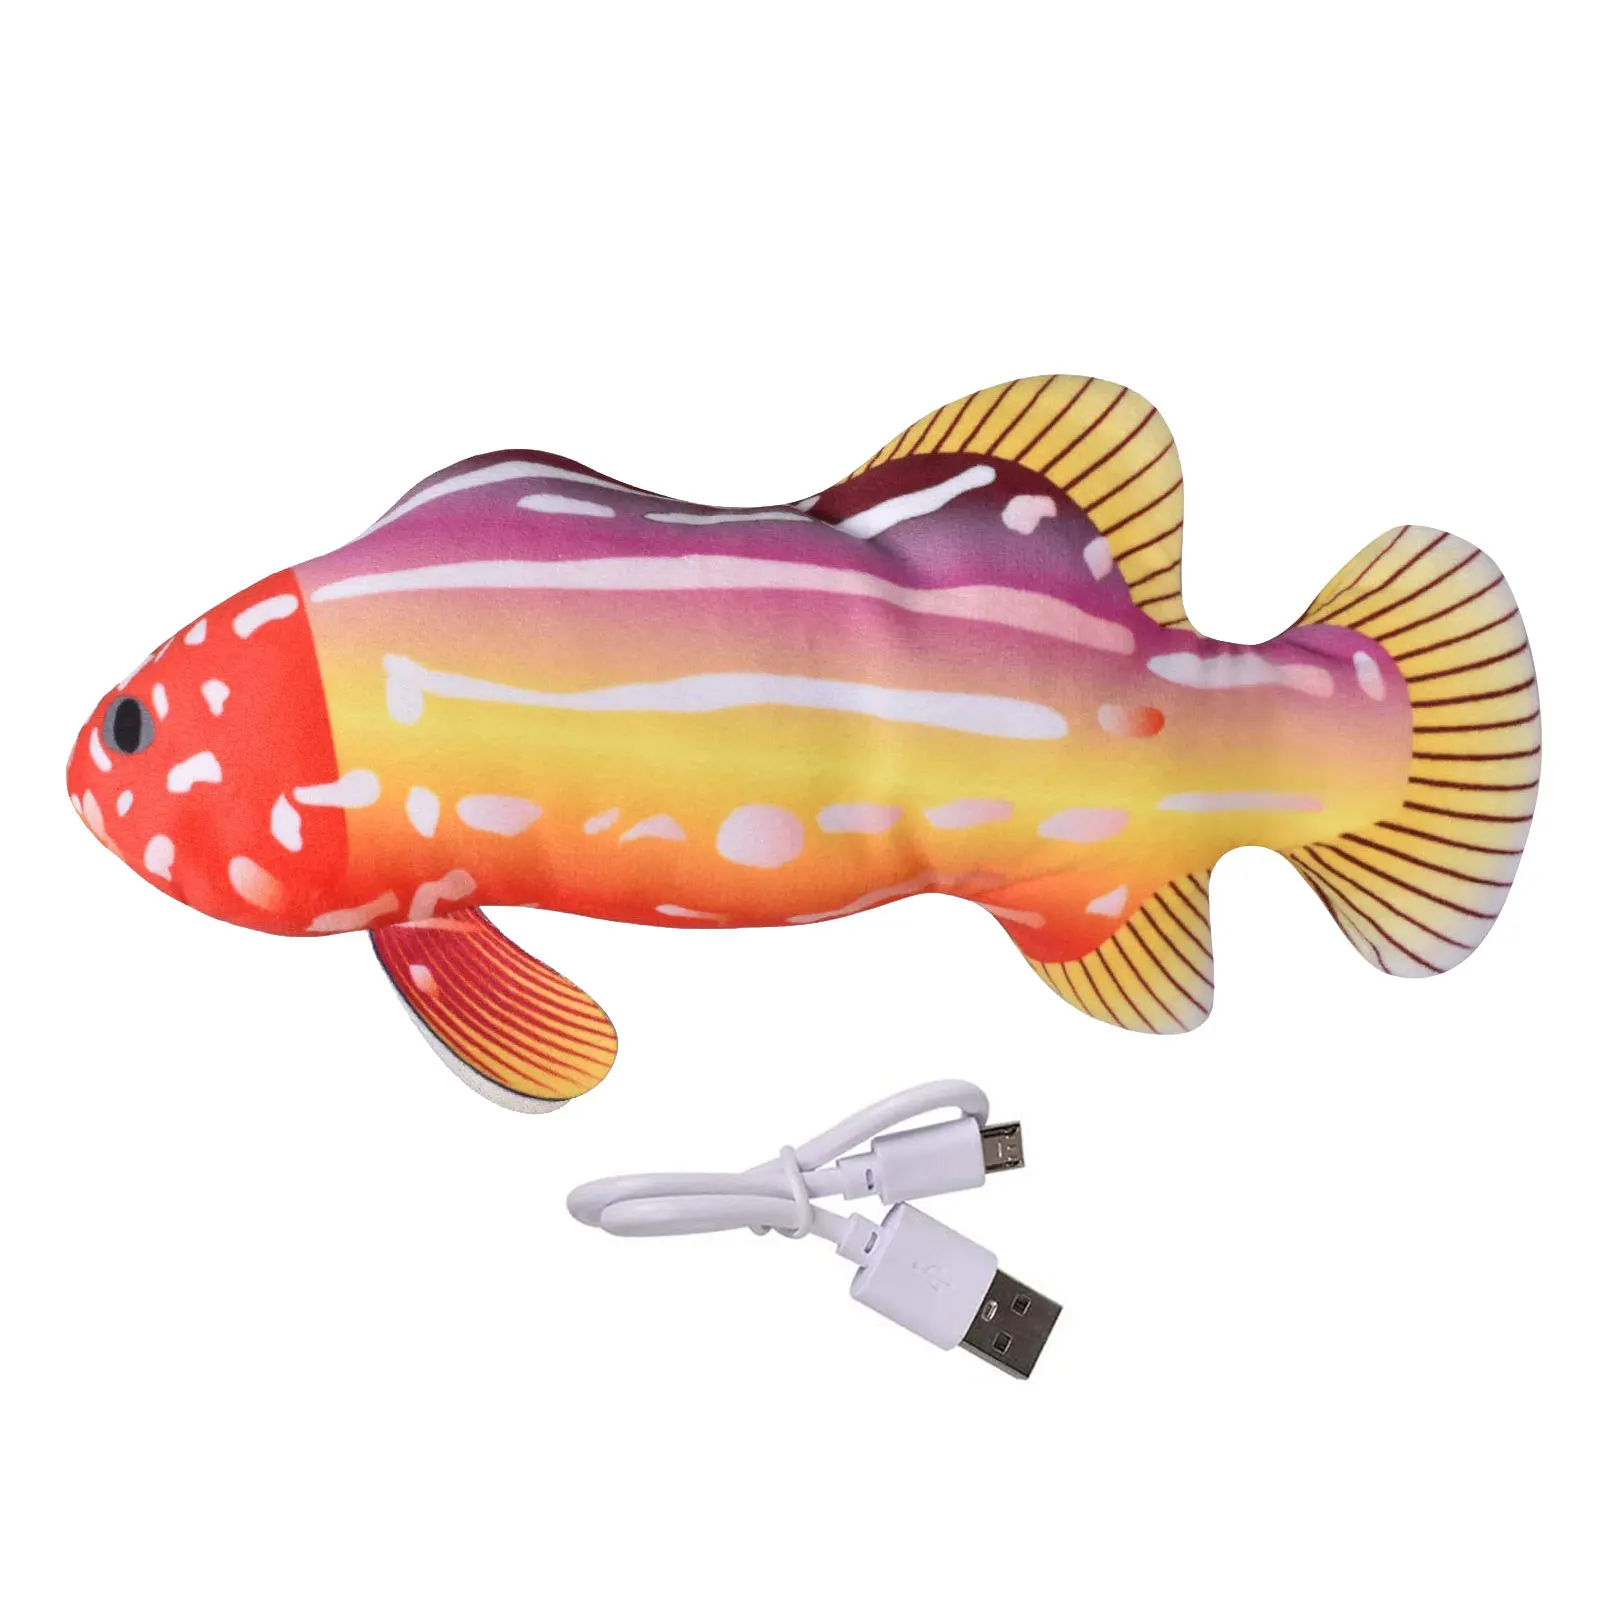 Flopping Fish Toy For Dogs Electric Moving Fish Cat Toy Floppy Fish Dog Toy Electric Moving Dog Fish Toy Wiggle Fish Catnip Toys